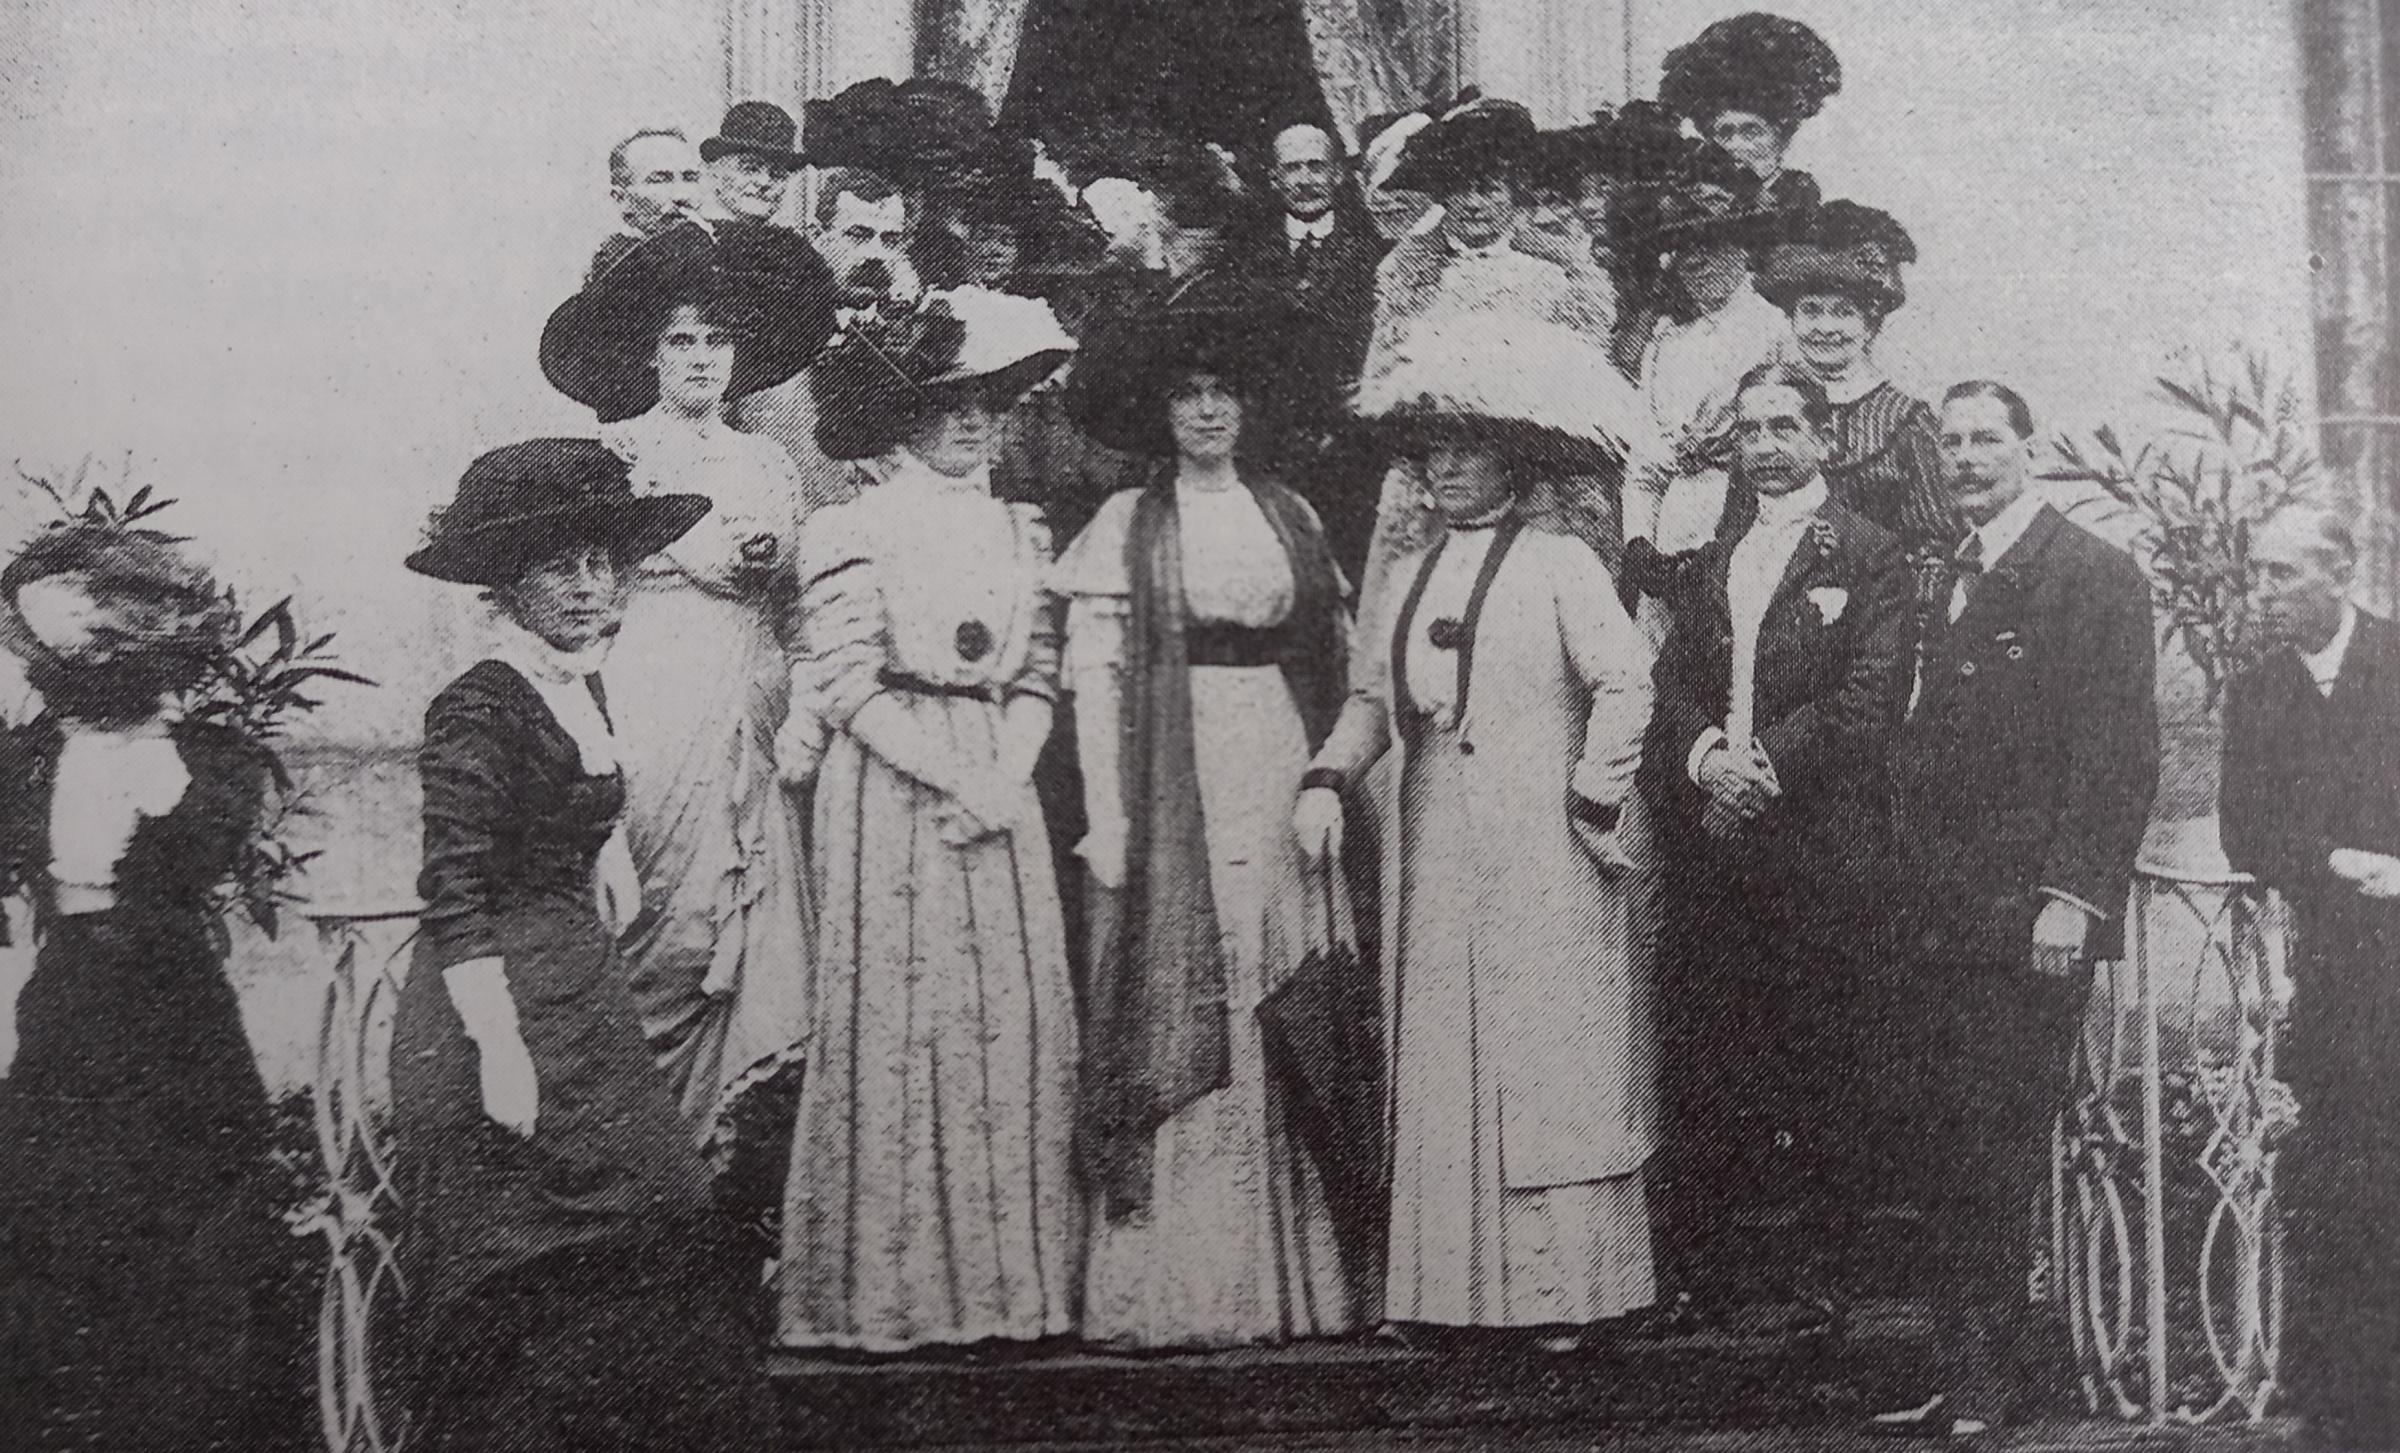 UPSTAIRS: A garden party at Croome Court in 1909. They carries their chins in the air